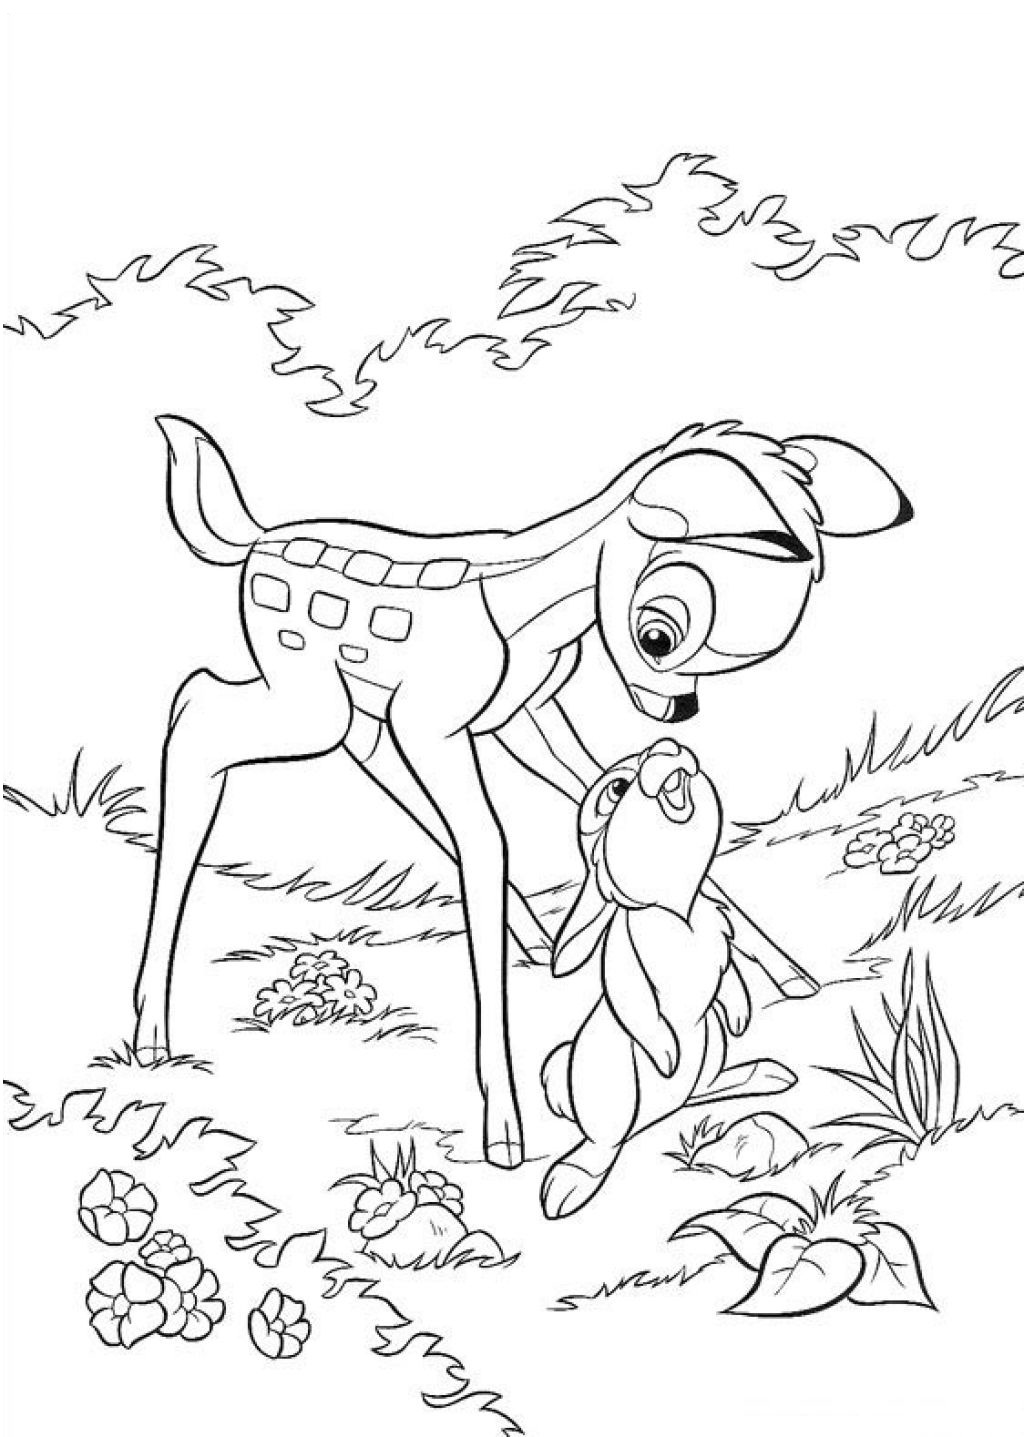 bestof-you-best-free-coloring-sheets-for-kids-pdf-full-in-the-year